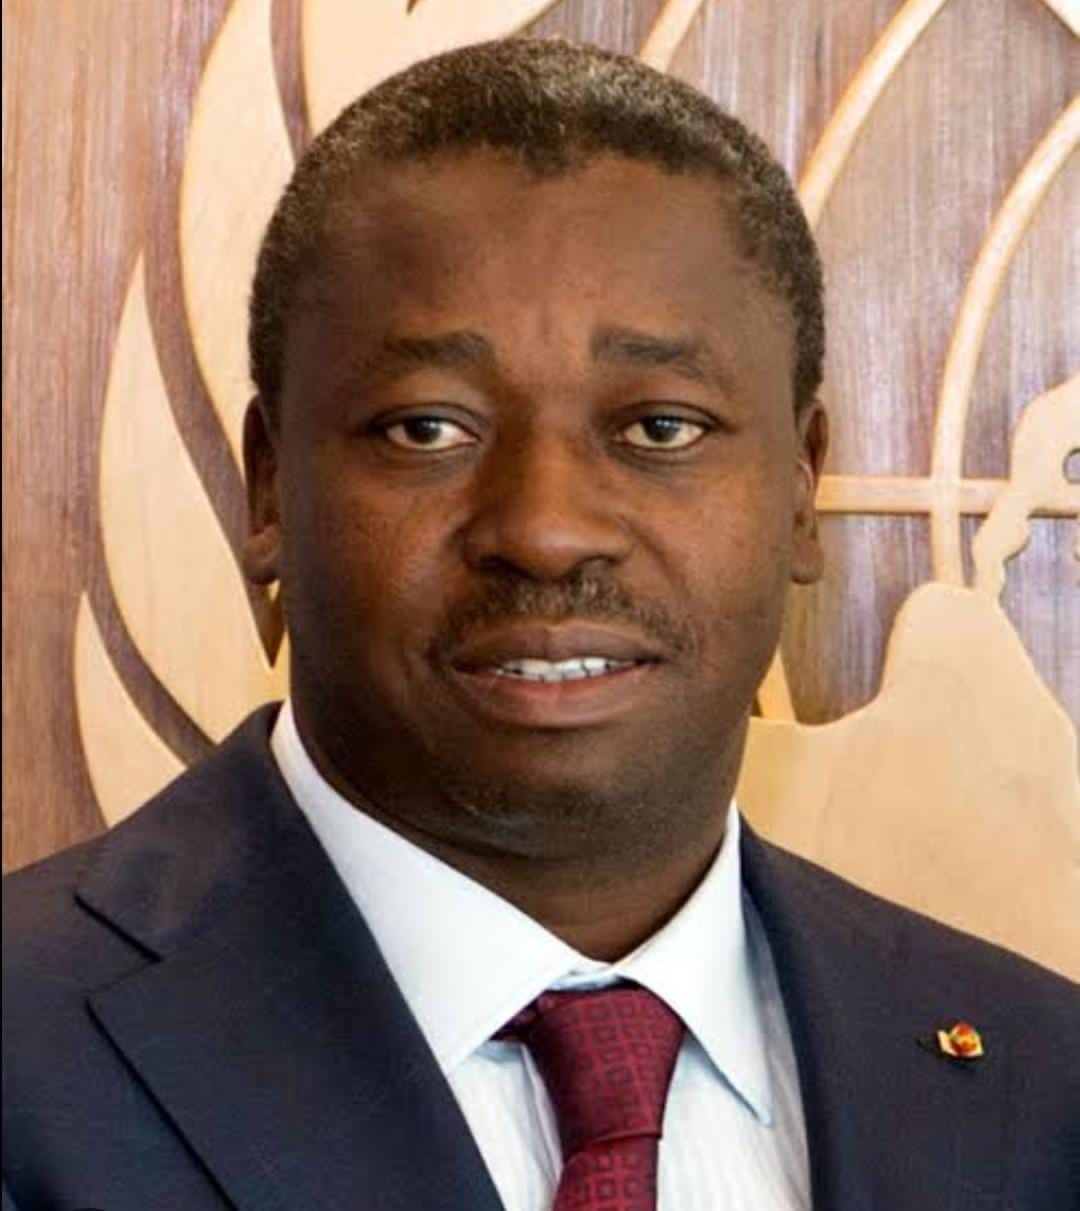 WADEMOS to Togo President: Postpone the promulgation of new constitution